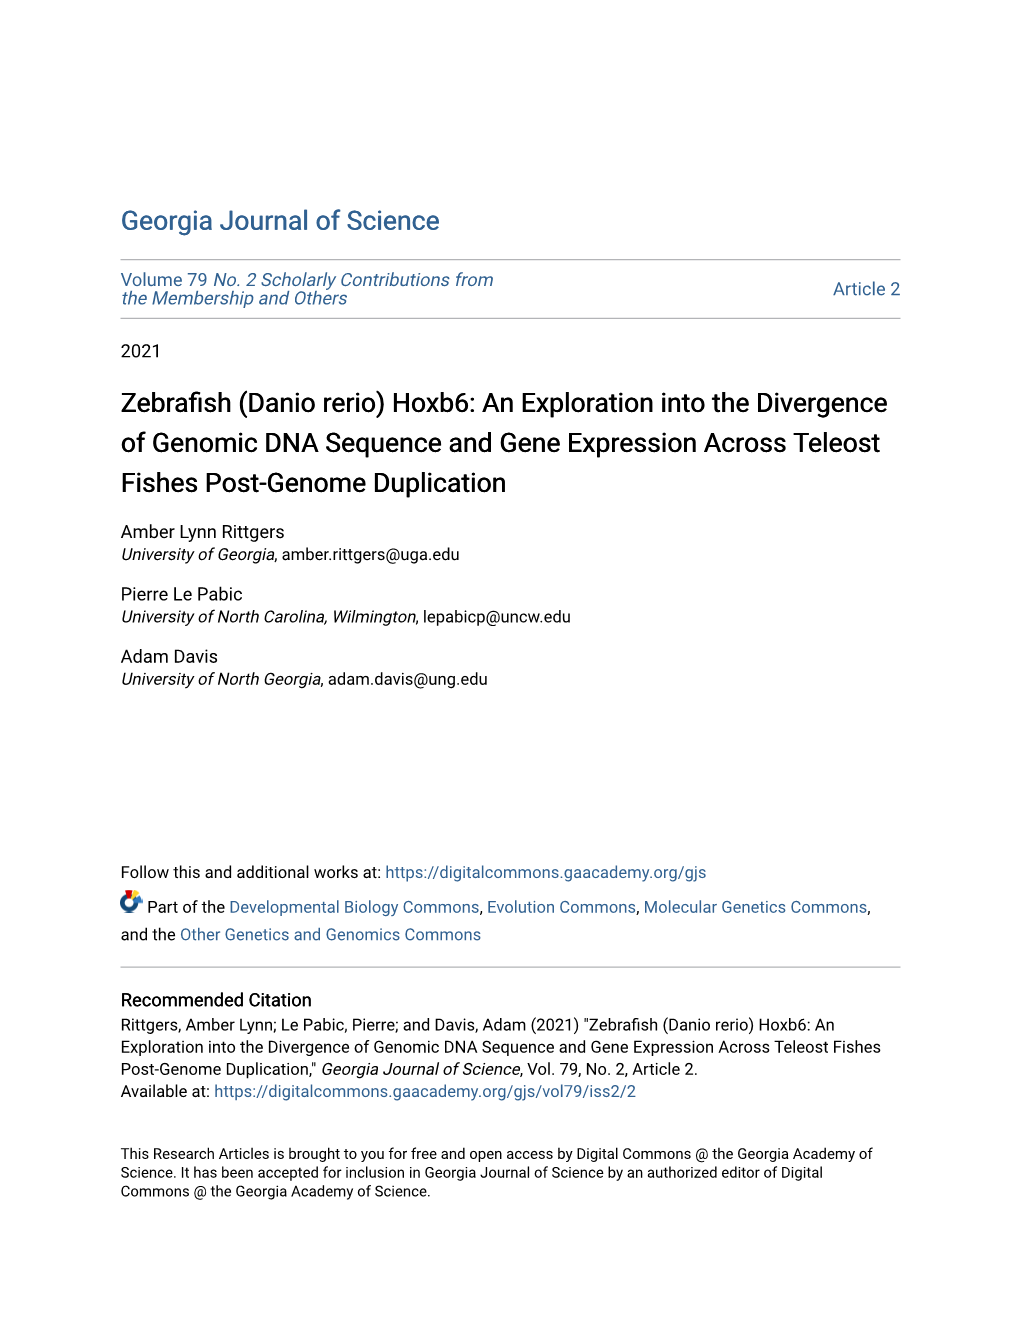 Zebrafish (Danio Rerio) Hoxb6: an Exploration Into the Divergence of Genomic Dna Sequence and Gene Expression Across Teleost Fishes Post-Genome Duplication